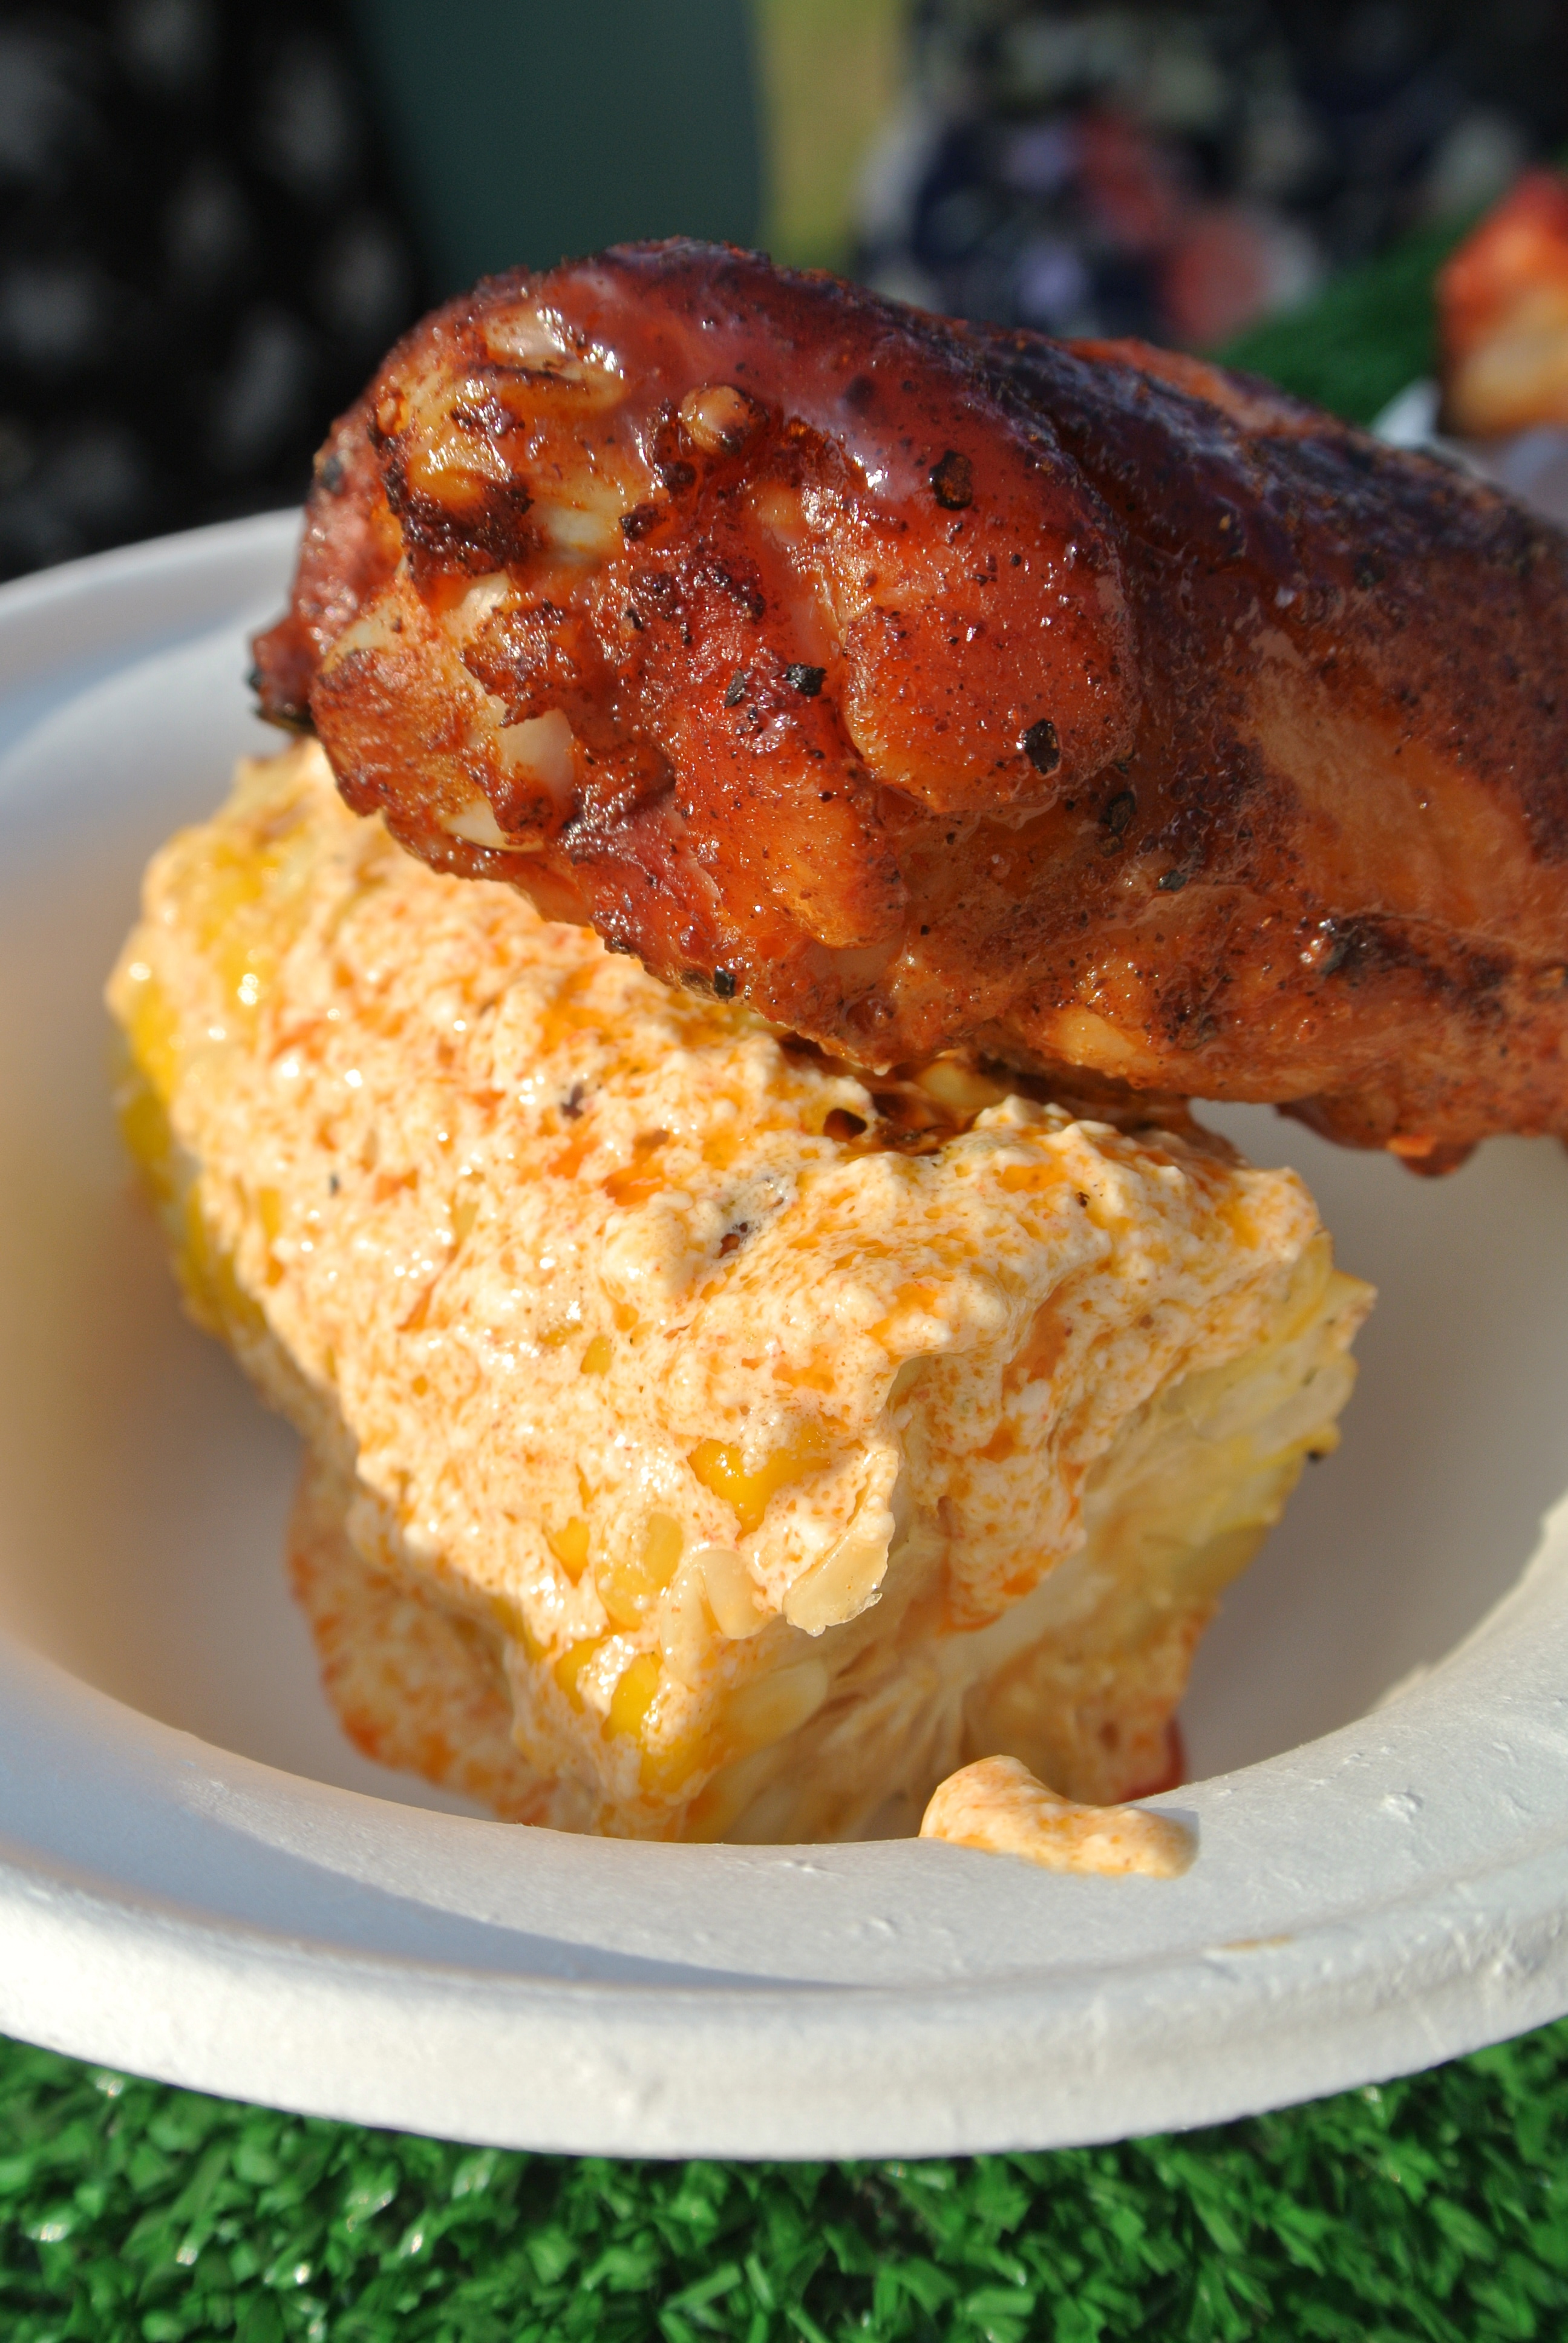 Barque's chicken thigh with cuban corn.